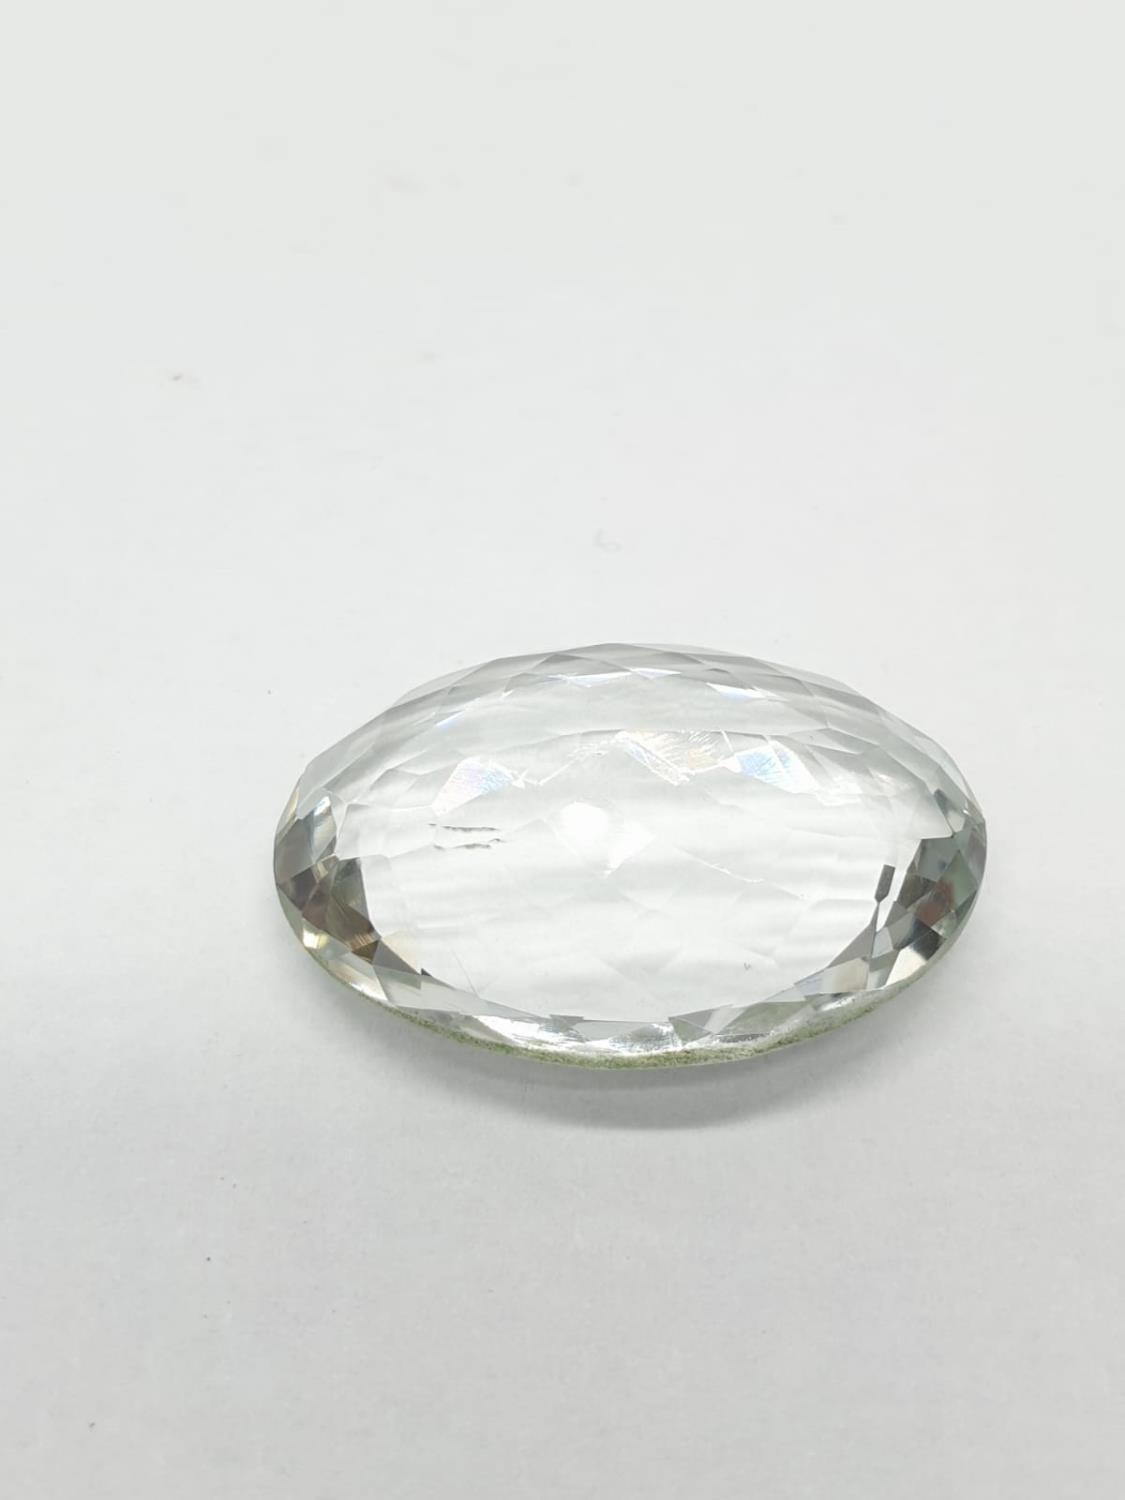 20.05 Cts Natural green amethyst. Oval mixed stone. GLI certification included.